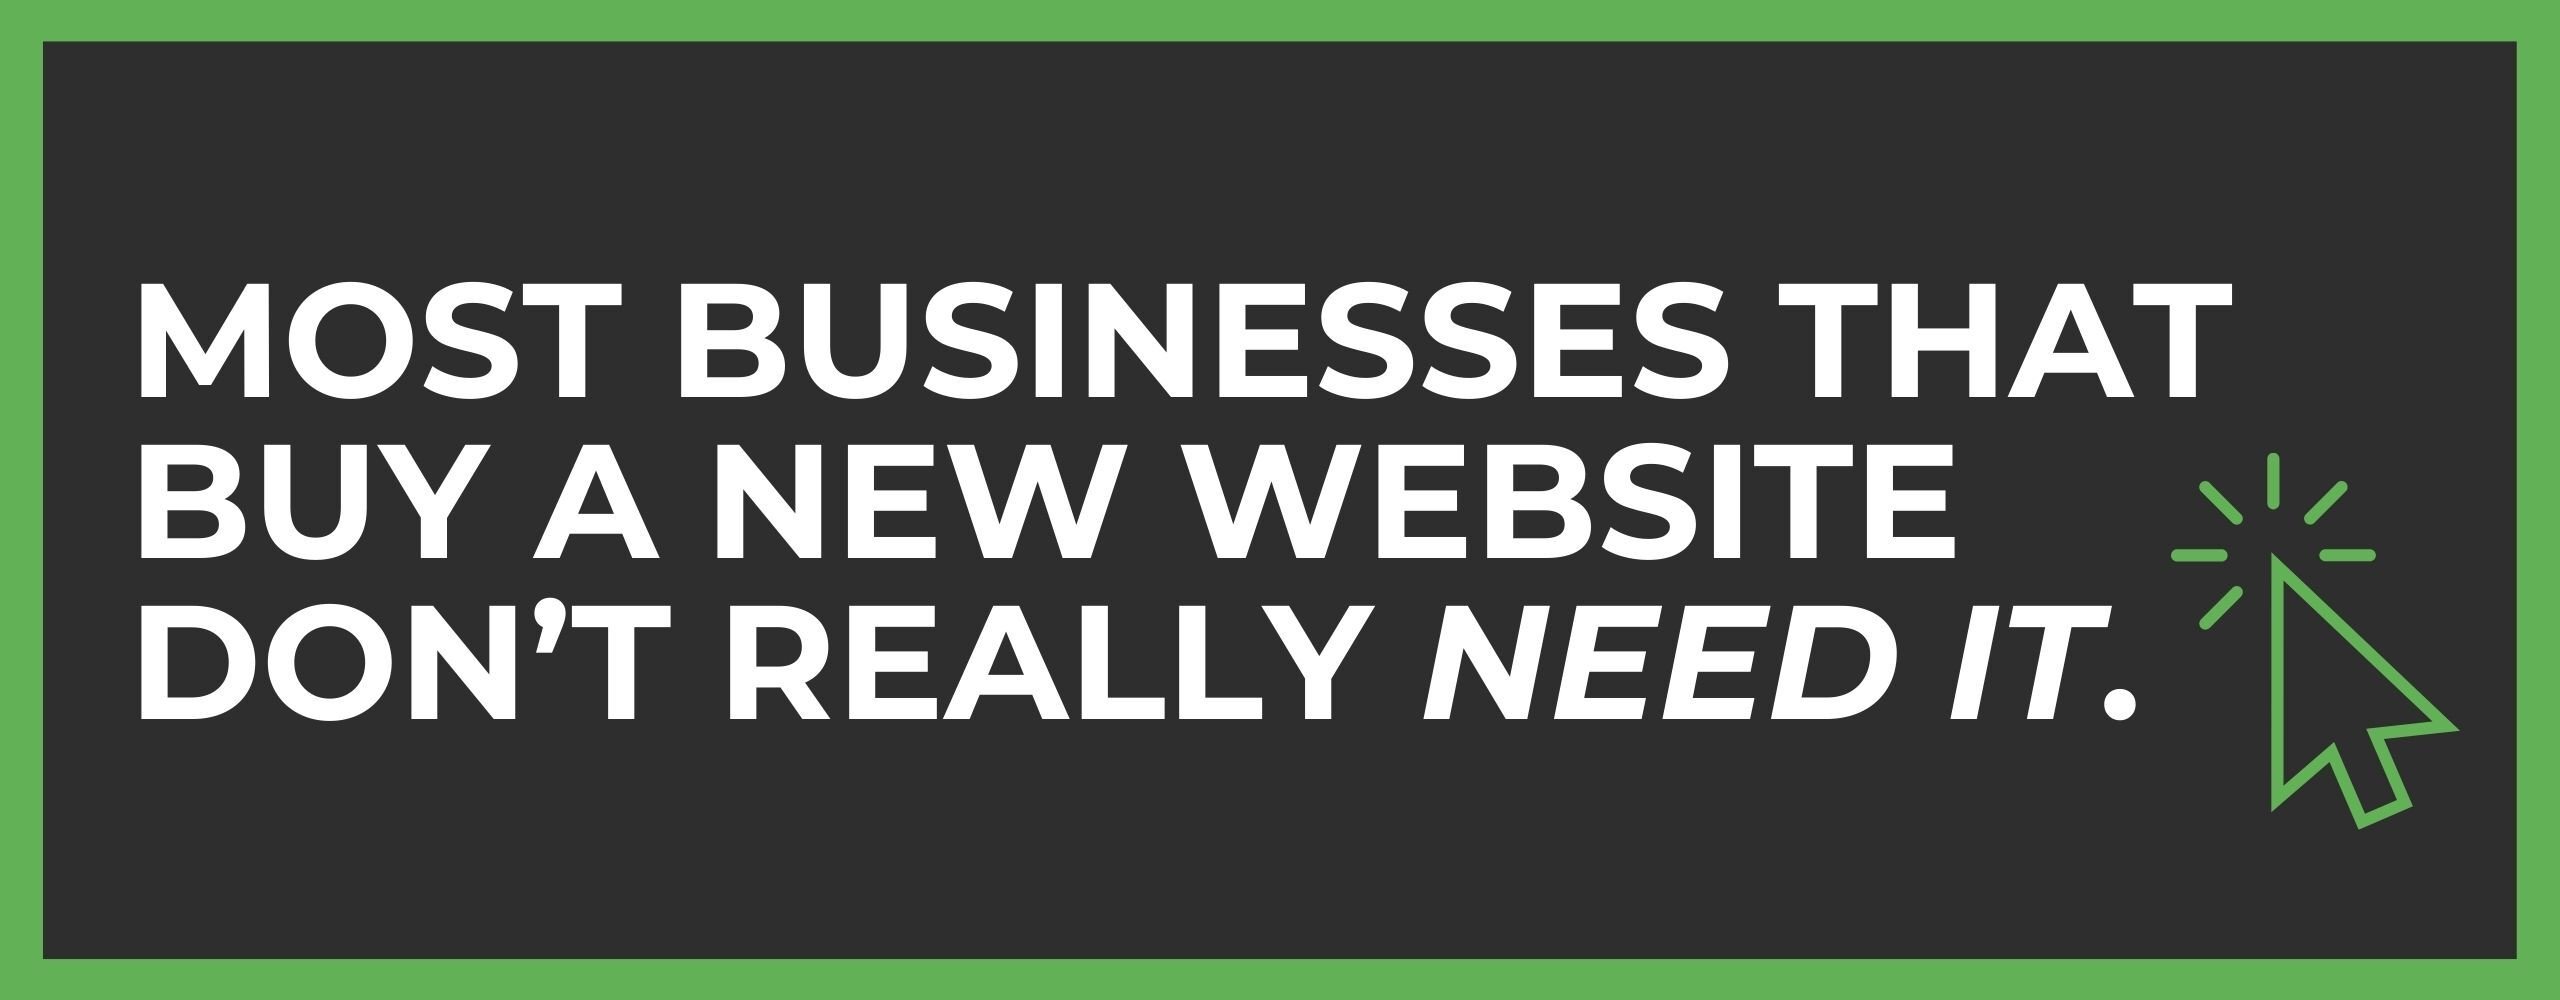 Business Tools - You Probably Don’t Need a New Website